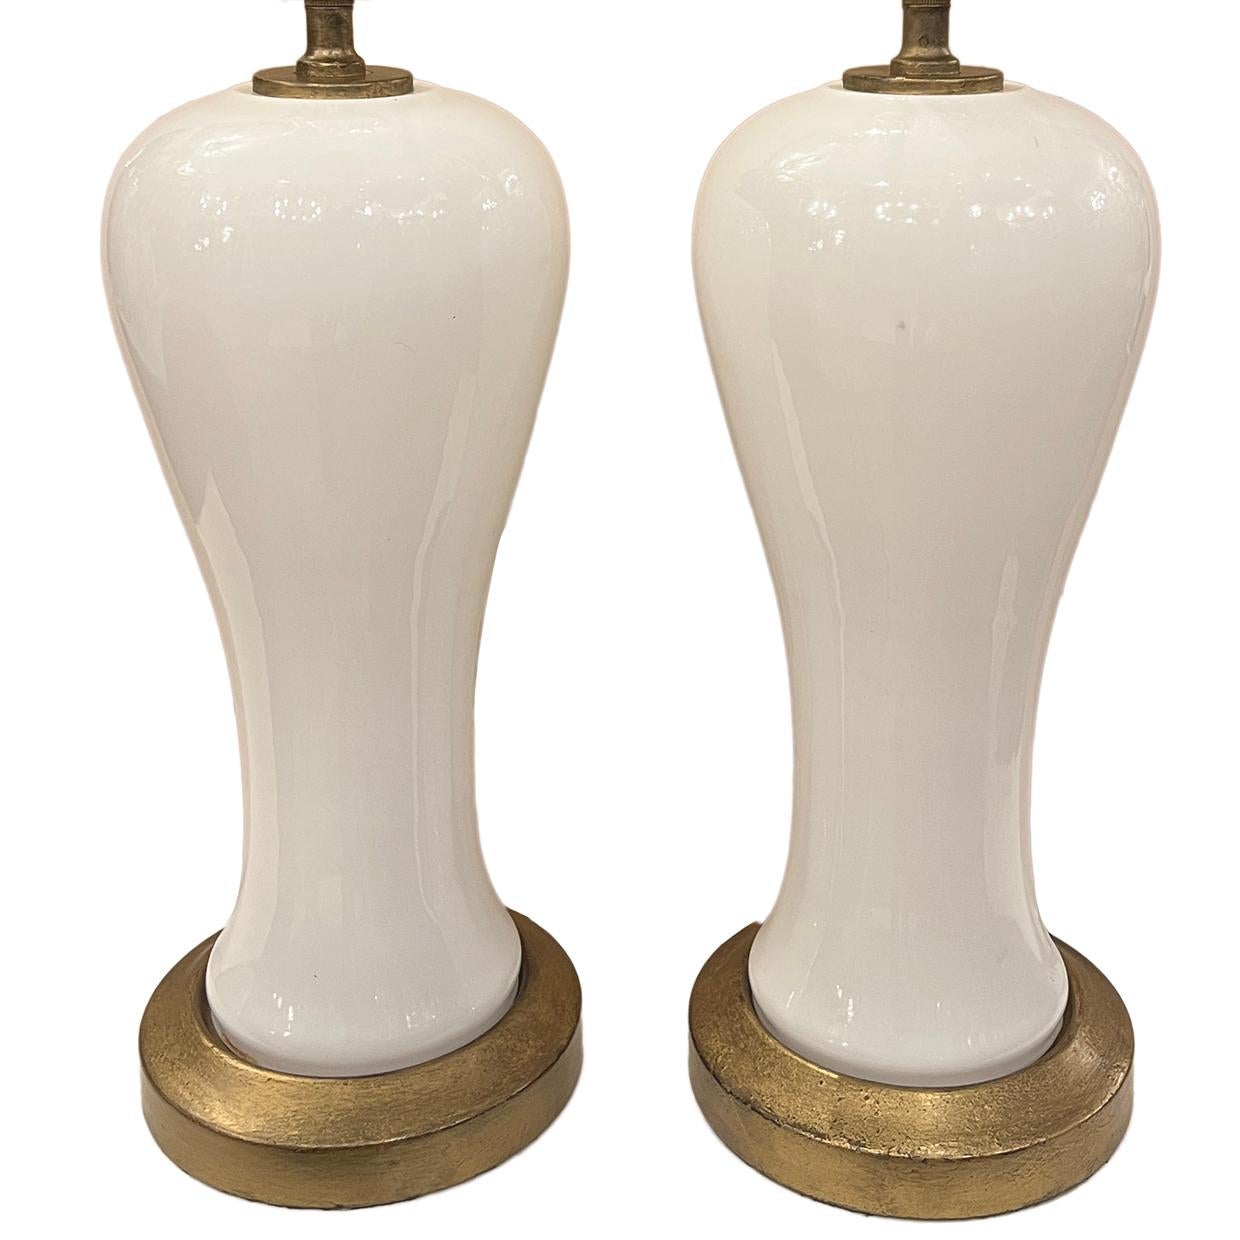 A pair of 1960's French opaline table lamps with gilt bases.

Measurements:
Height of body: 17.5